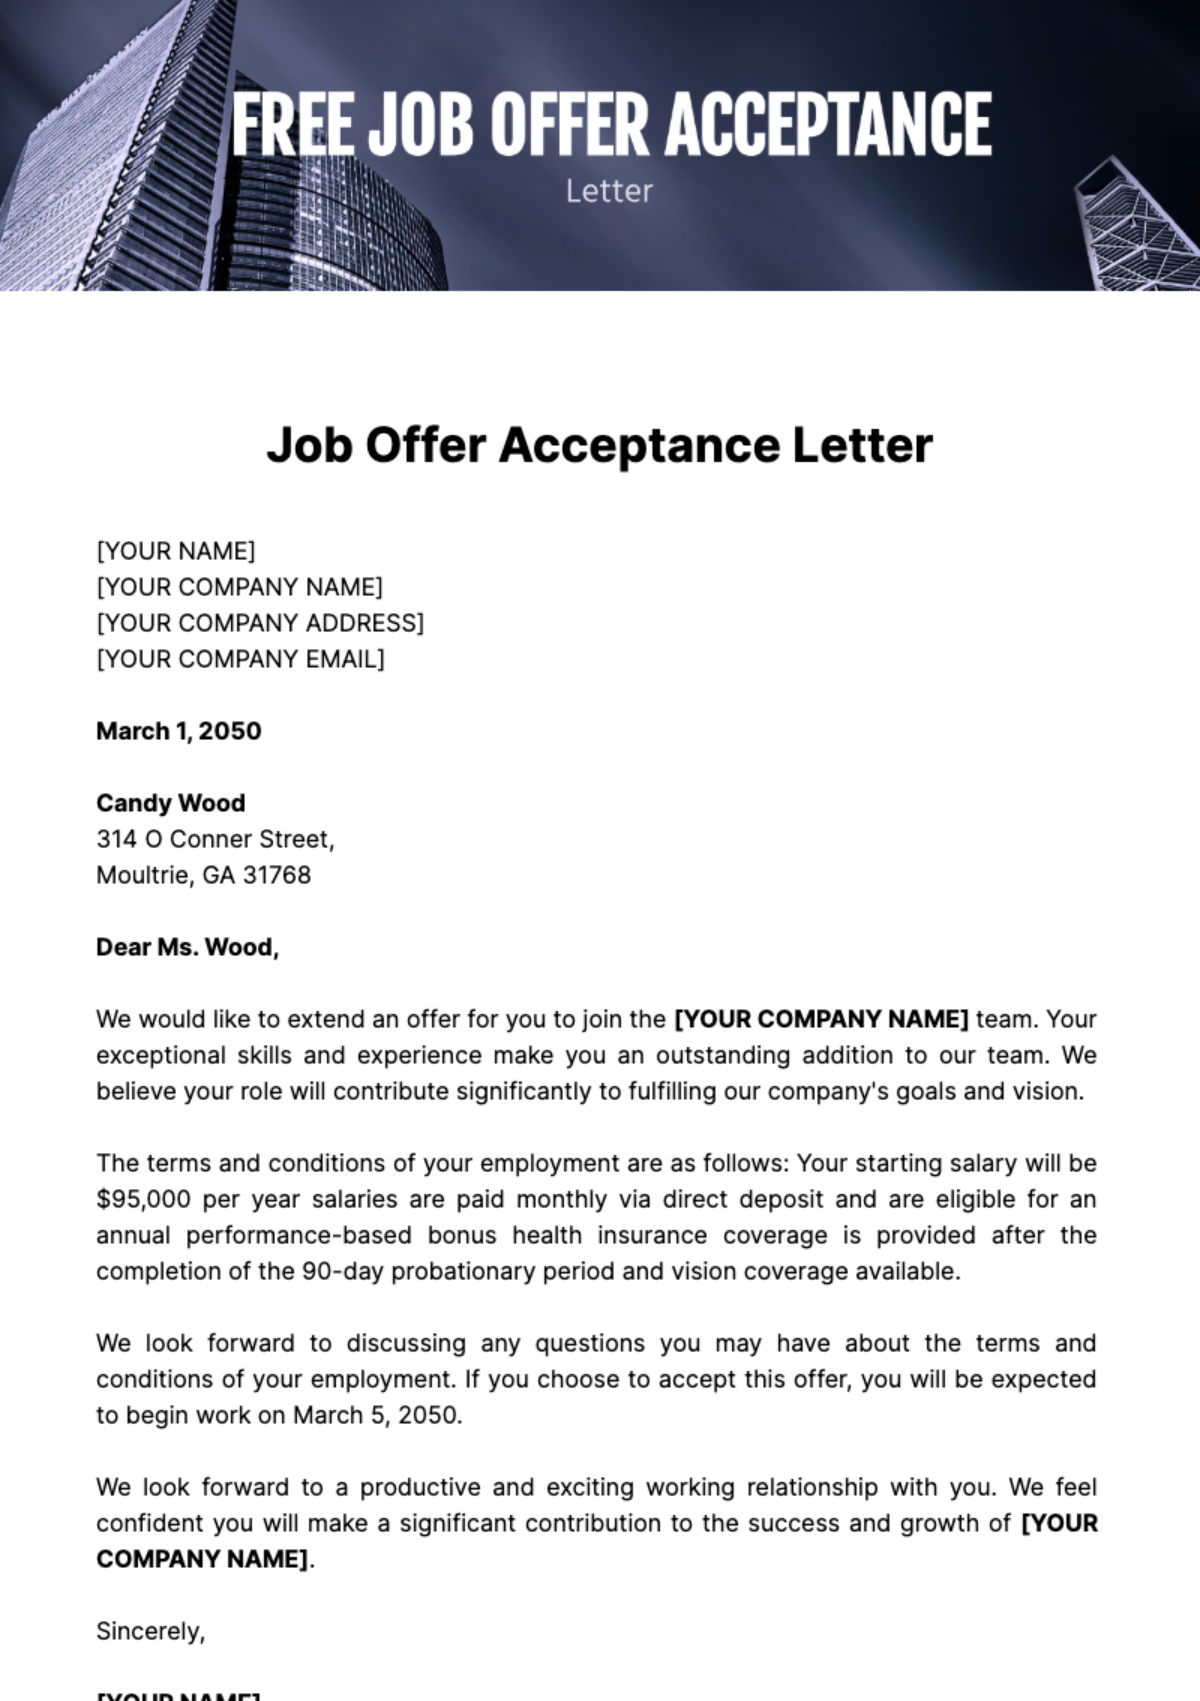 Free Job Offer Acceptance Letter Template